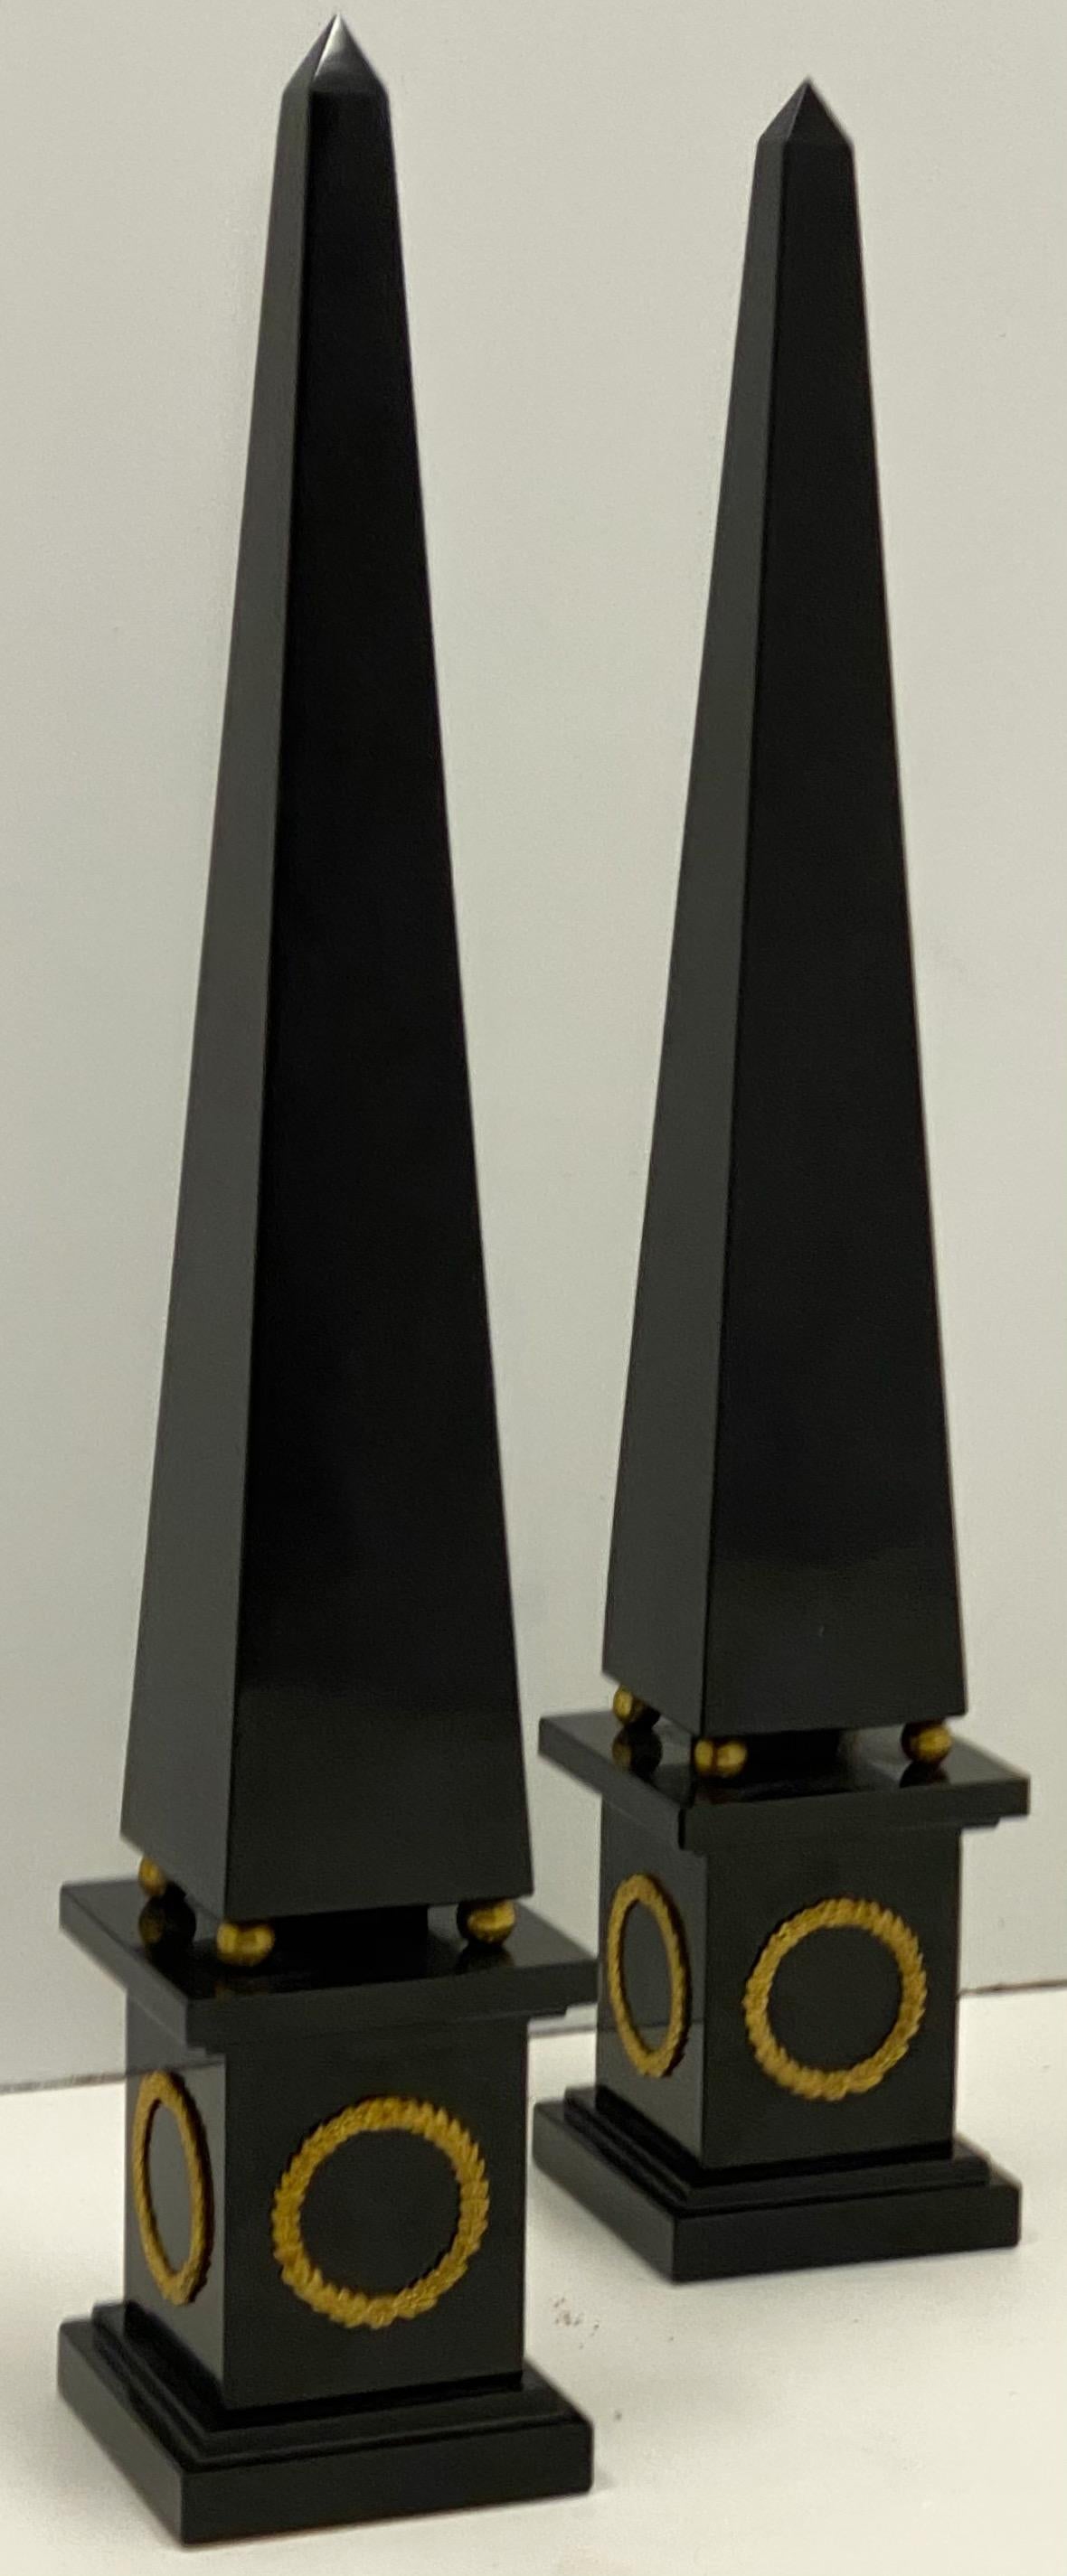 This is a pair of Italian neoclassical style marble obelisks with gilt accents. They are unmarked and in very good condition. The bottoms are lined with felt.